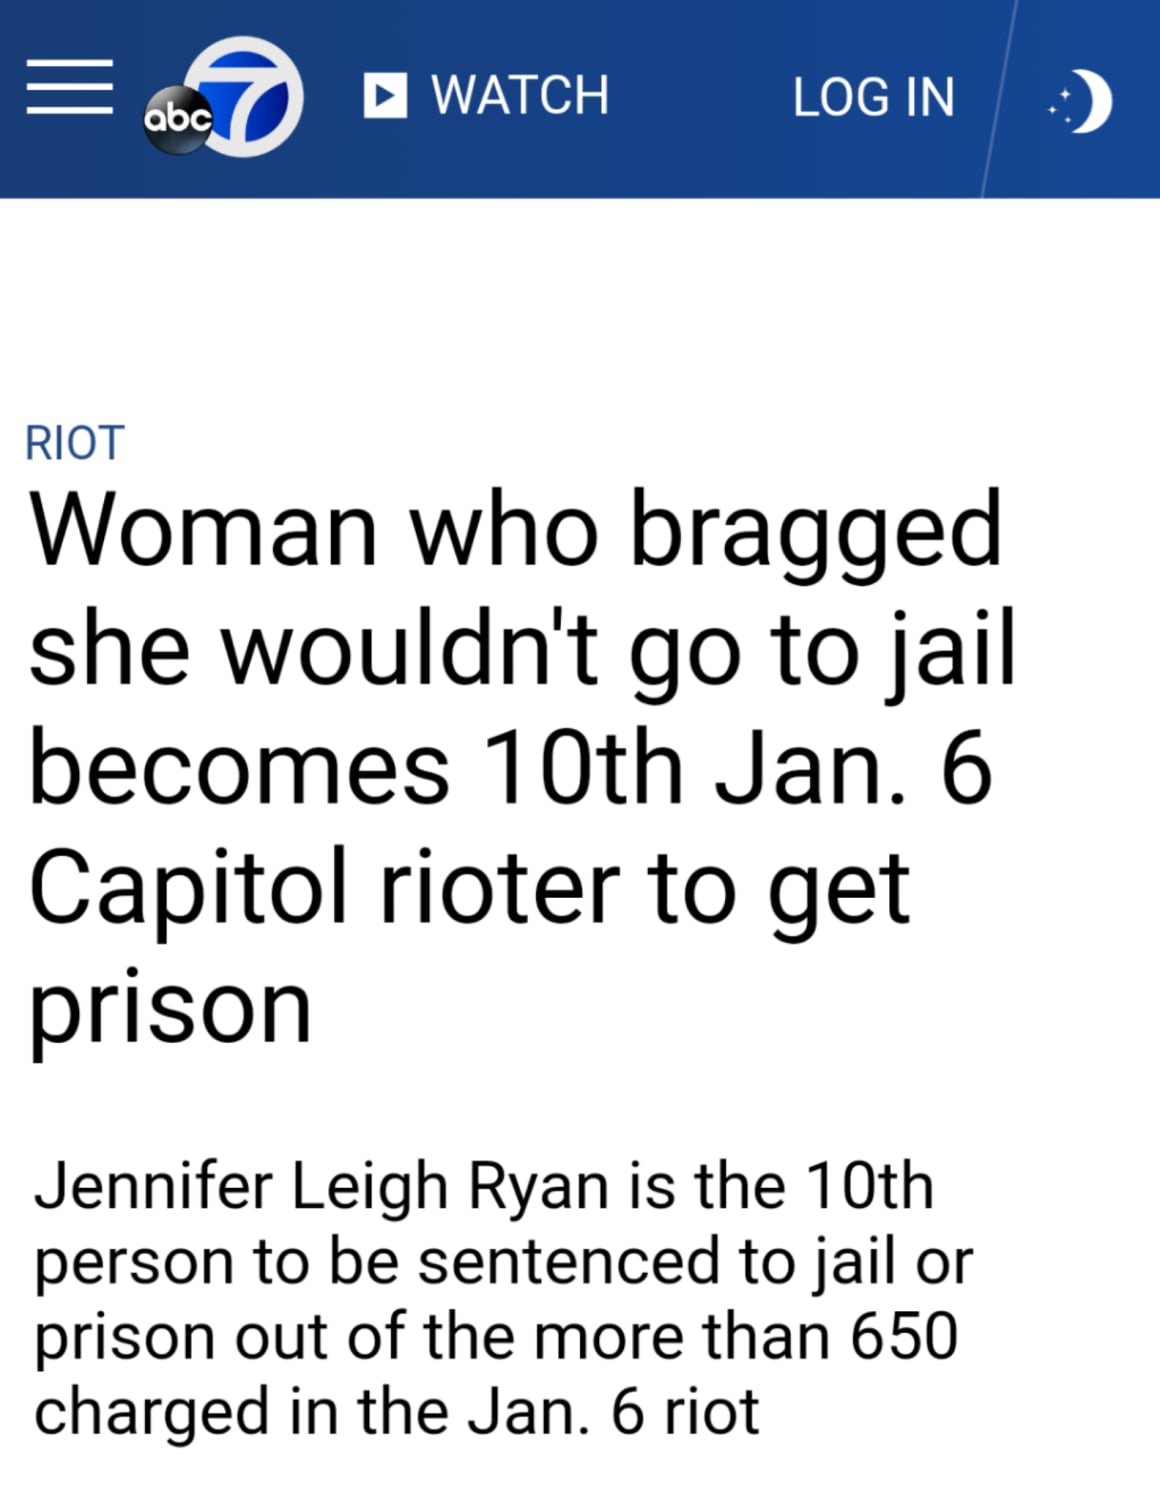 Woman who bragged she wouldn't go to jail becomes 10th Jan. 6 Capitol rioter to get prison